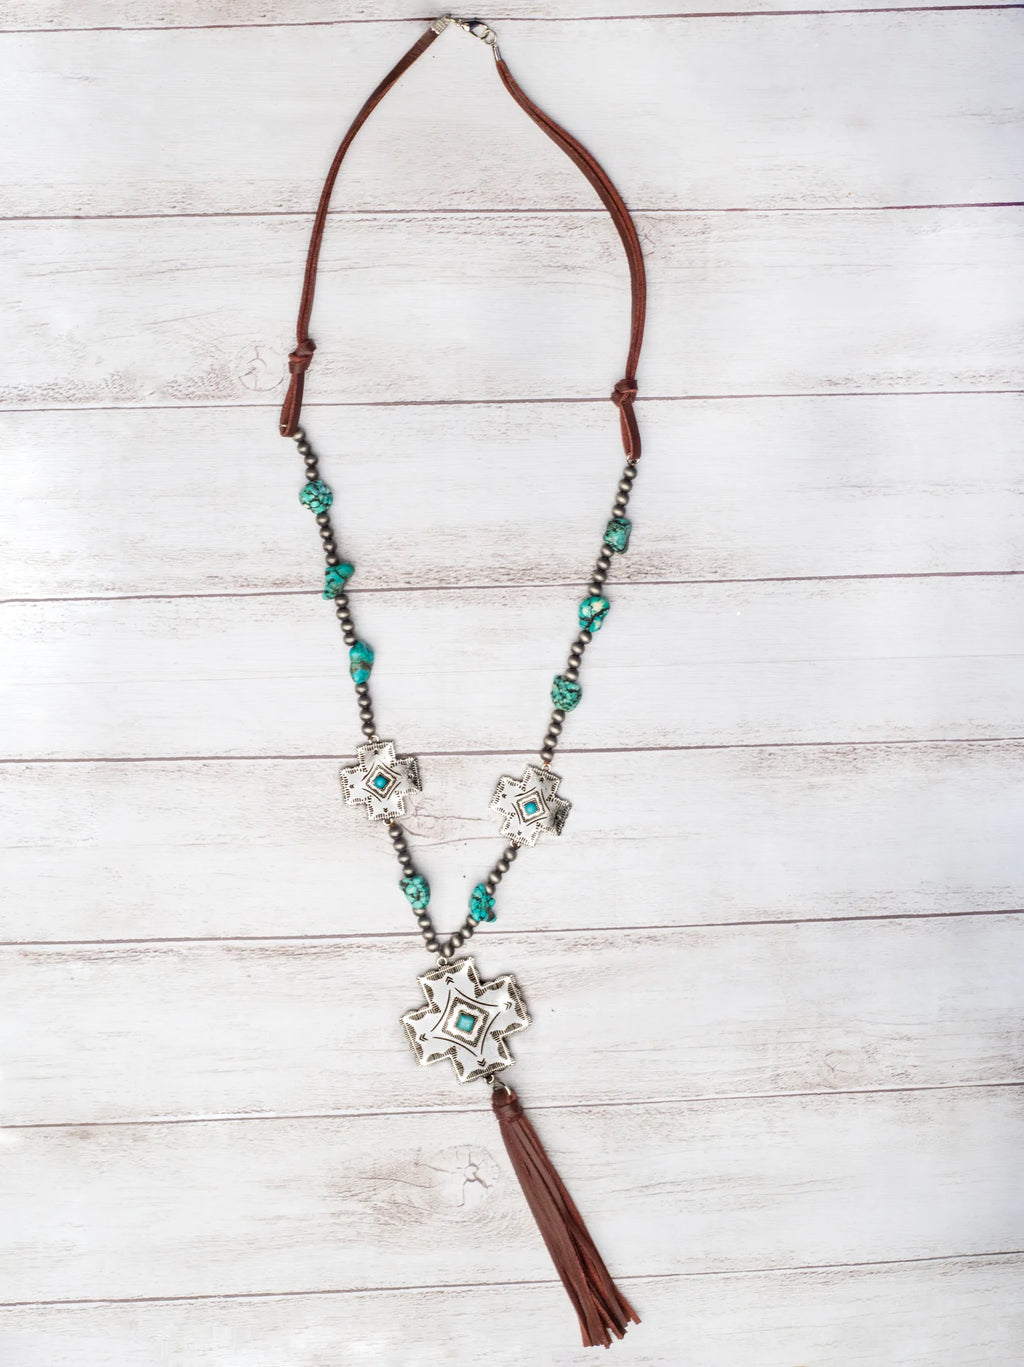 Boots, Jeans & Turquoise Necklace - Gypsy Rae Boutique, LLC